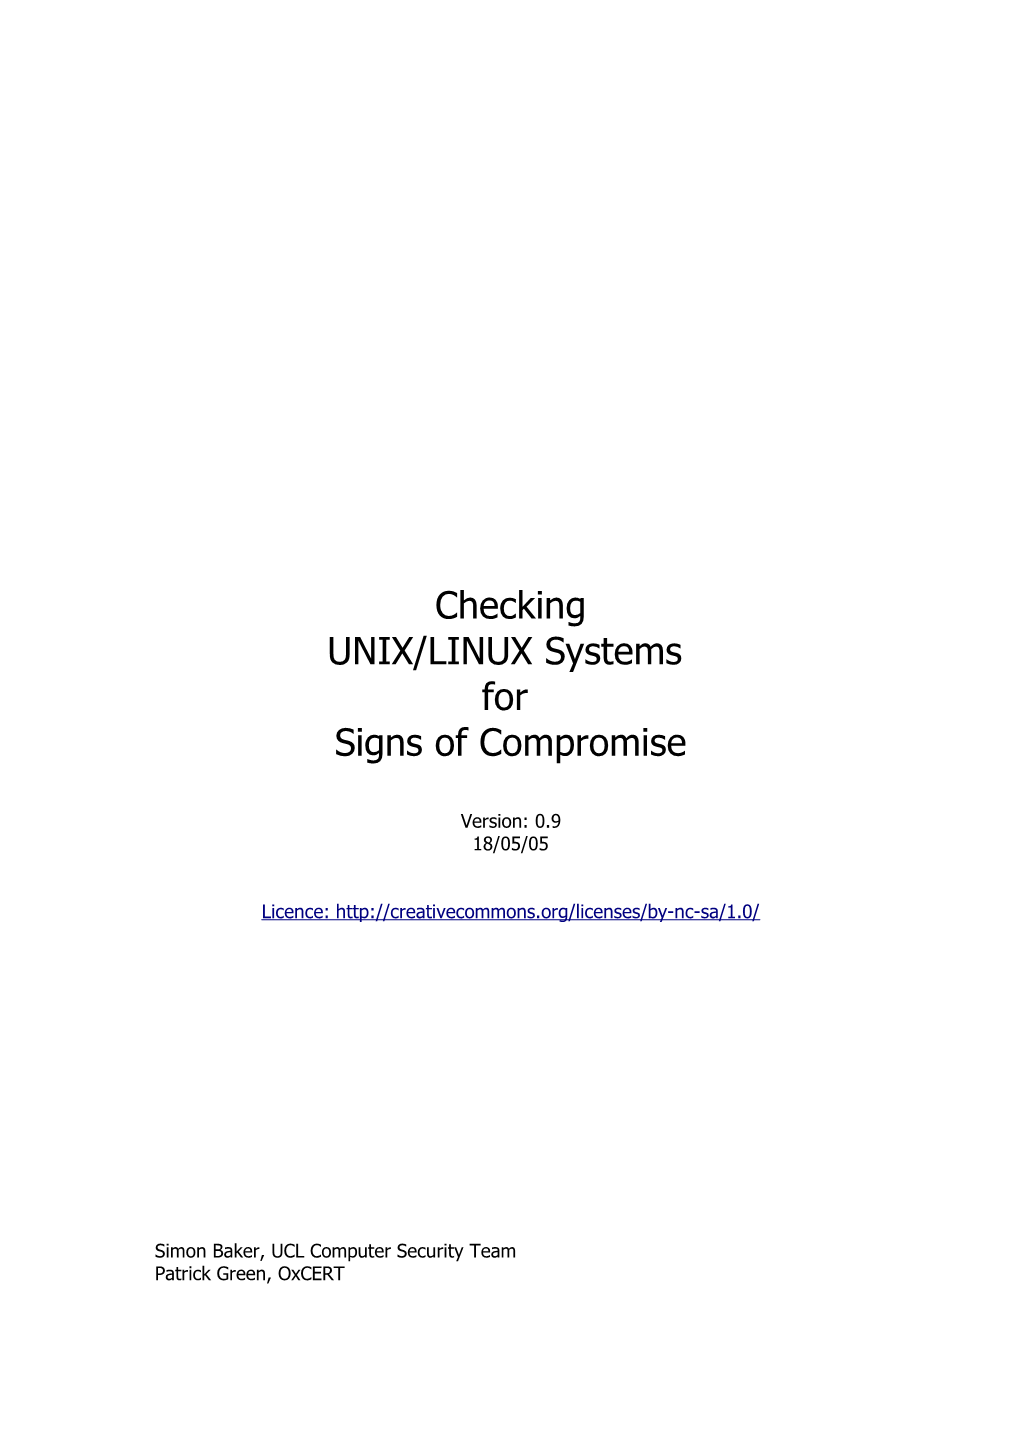 Checking UNIX/LINUX Systems for Signs of Compromise